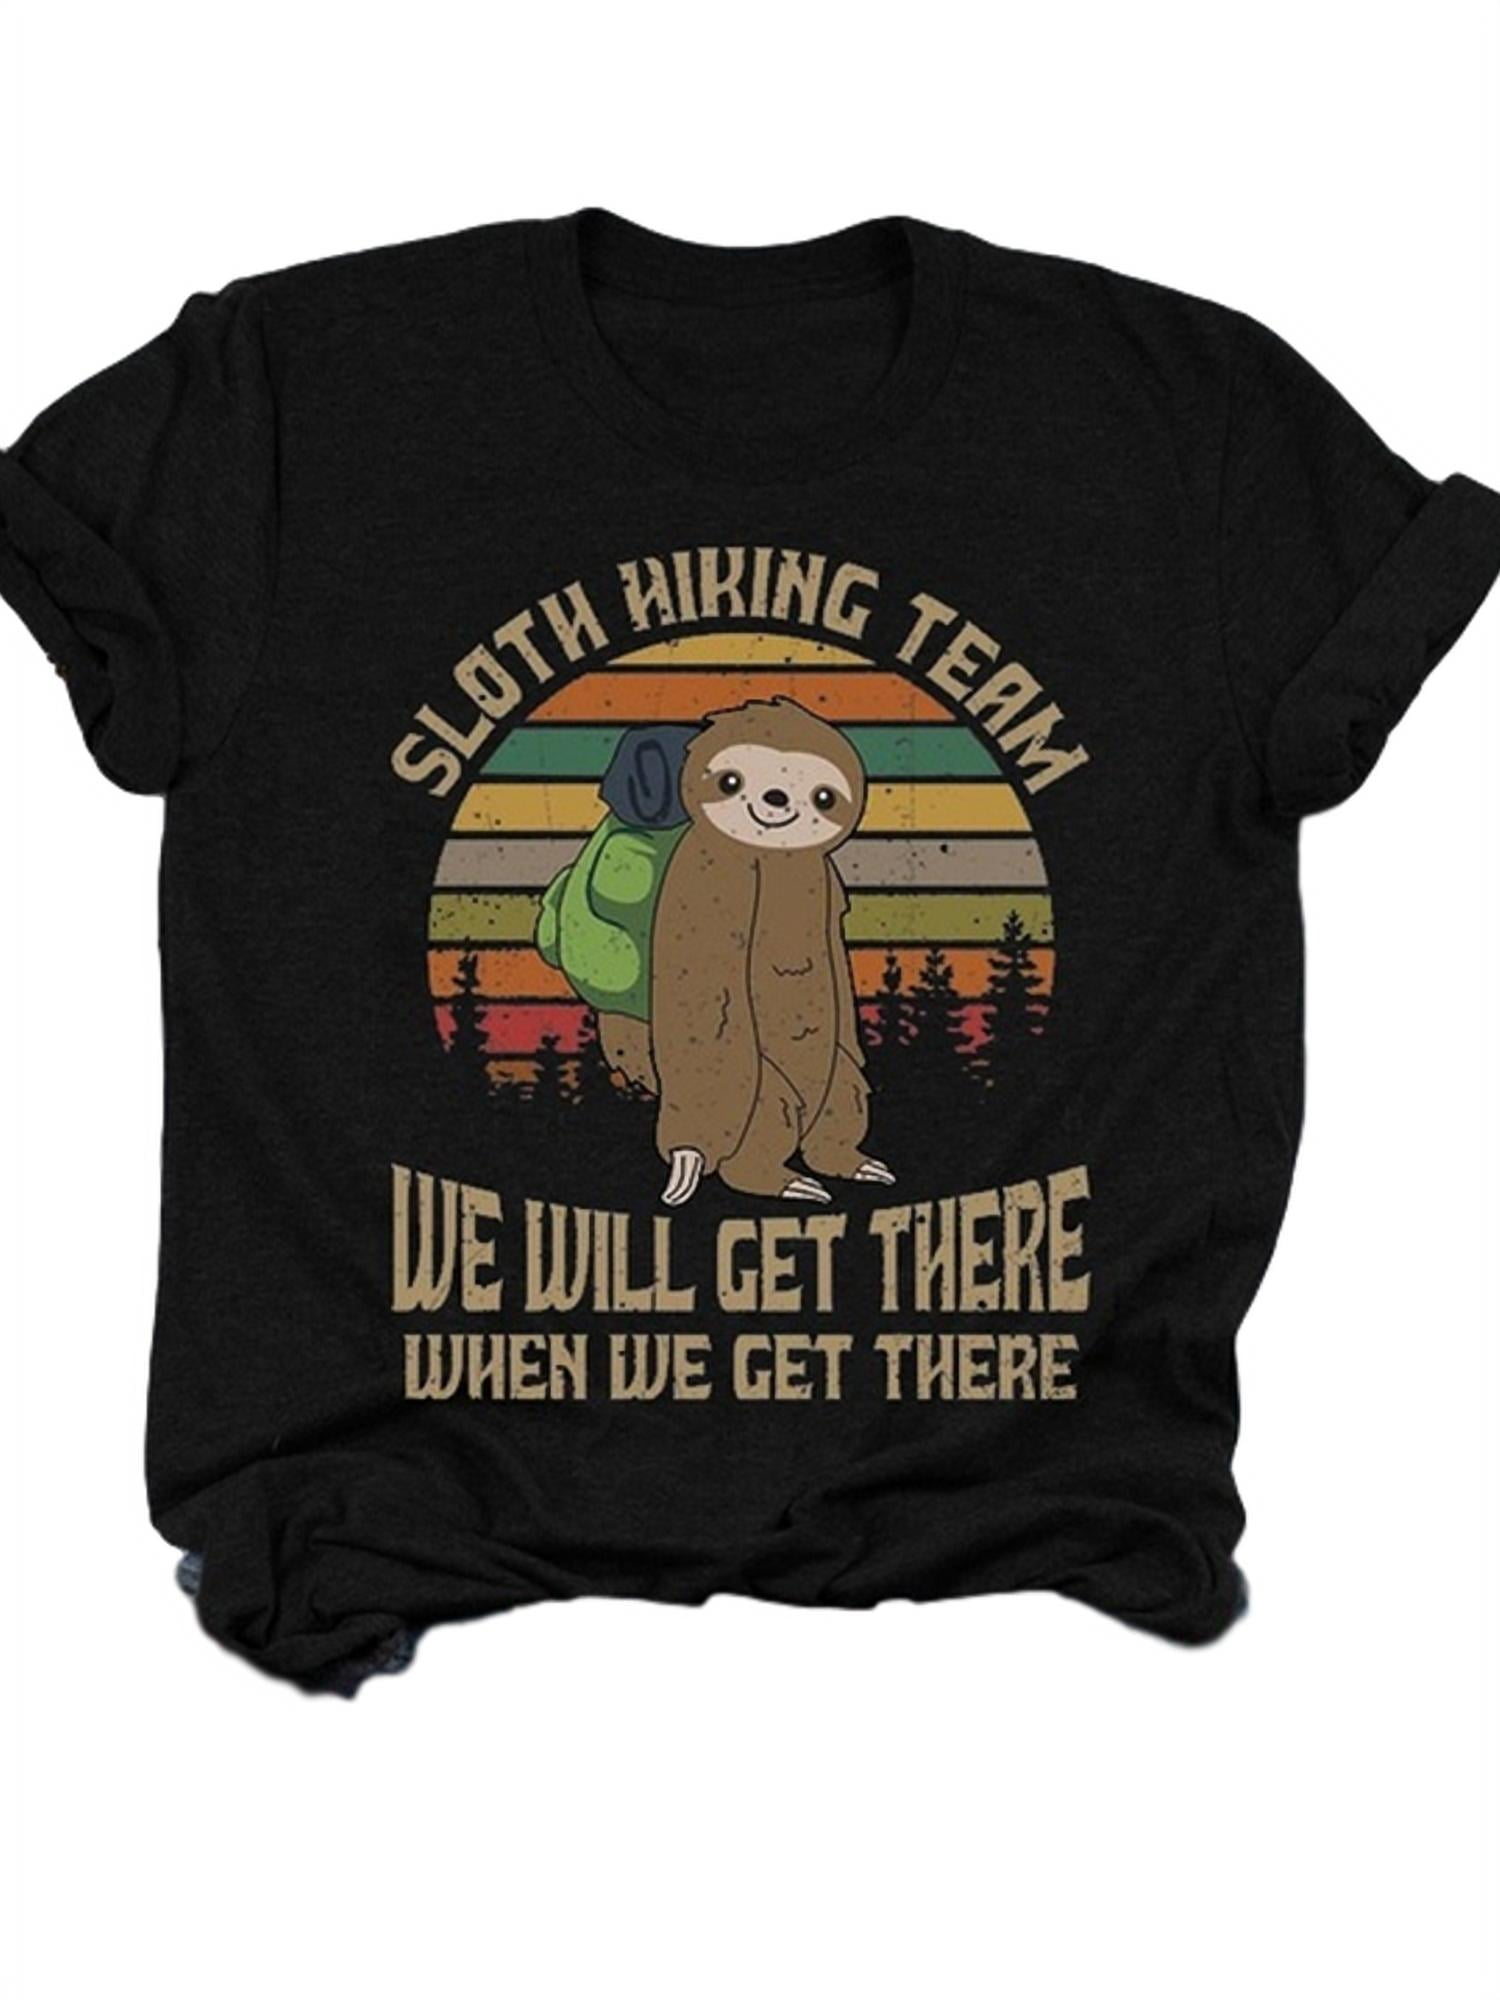 Gift for Hiker Short-Sleeve Unisex T-Shirt Sloth Hiking Team T-Shirt Get there When We Get There Funny T-Shirt Sloth Lover Shirt